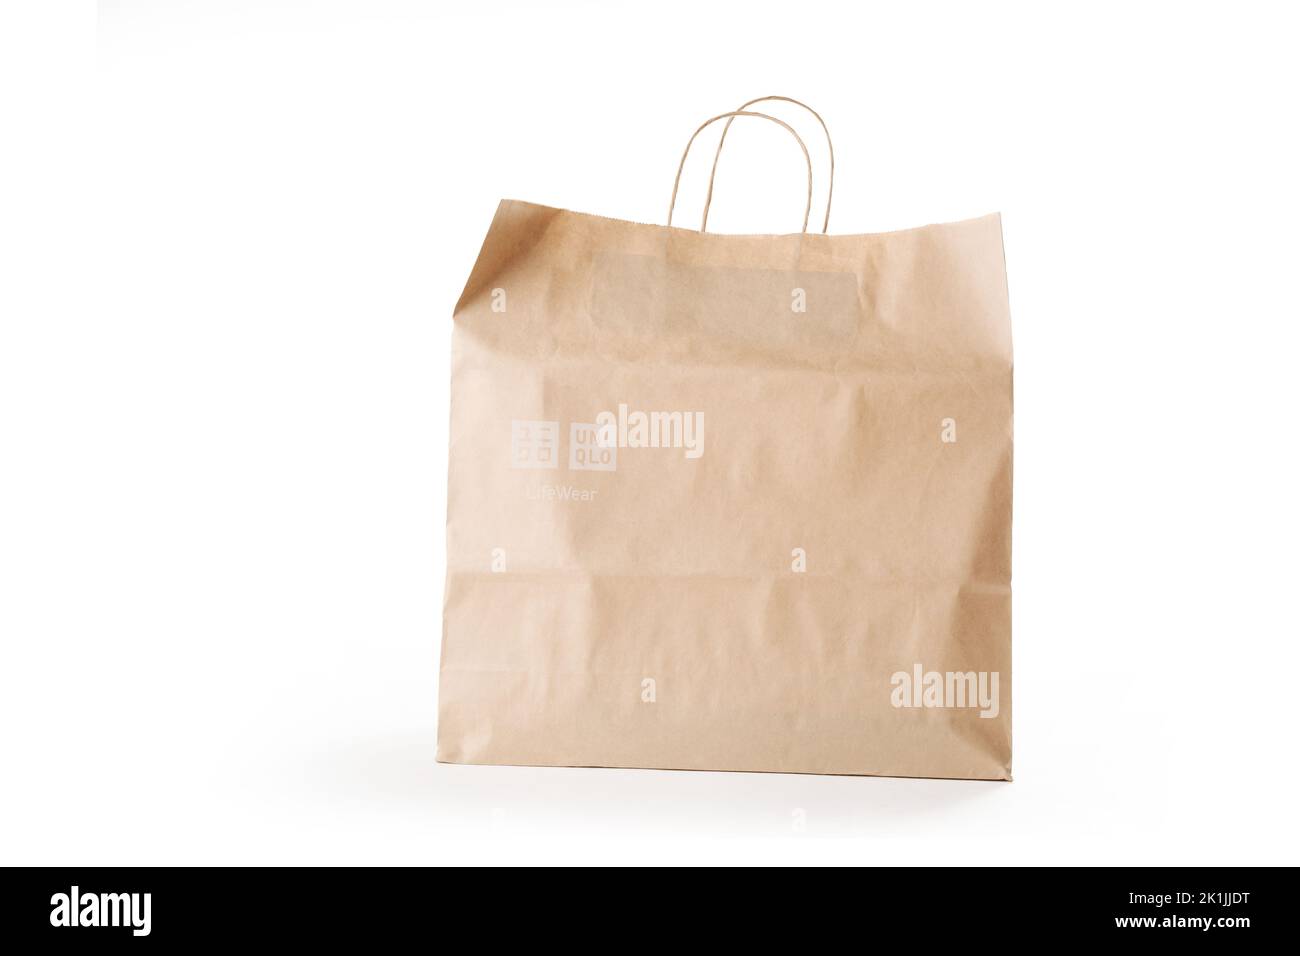 Cyprus, Paphos - SEPTEMBER 08, 2022: Uniqlo paper bag from Japanese casual clothes brand. Over white background. Stock Photo